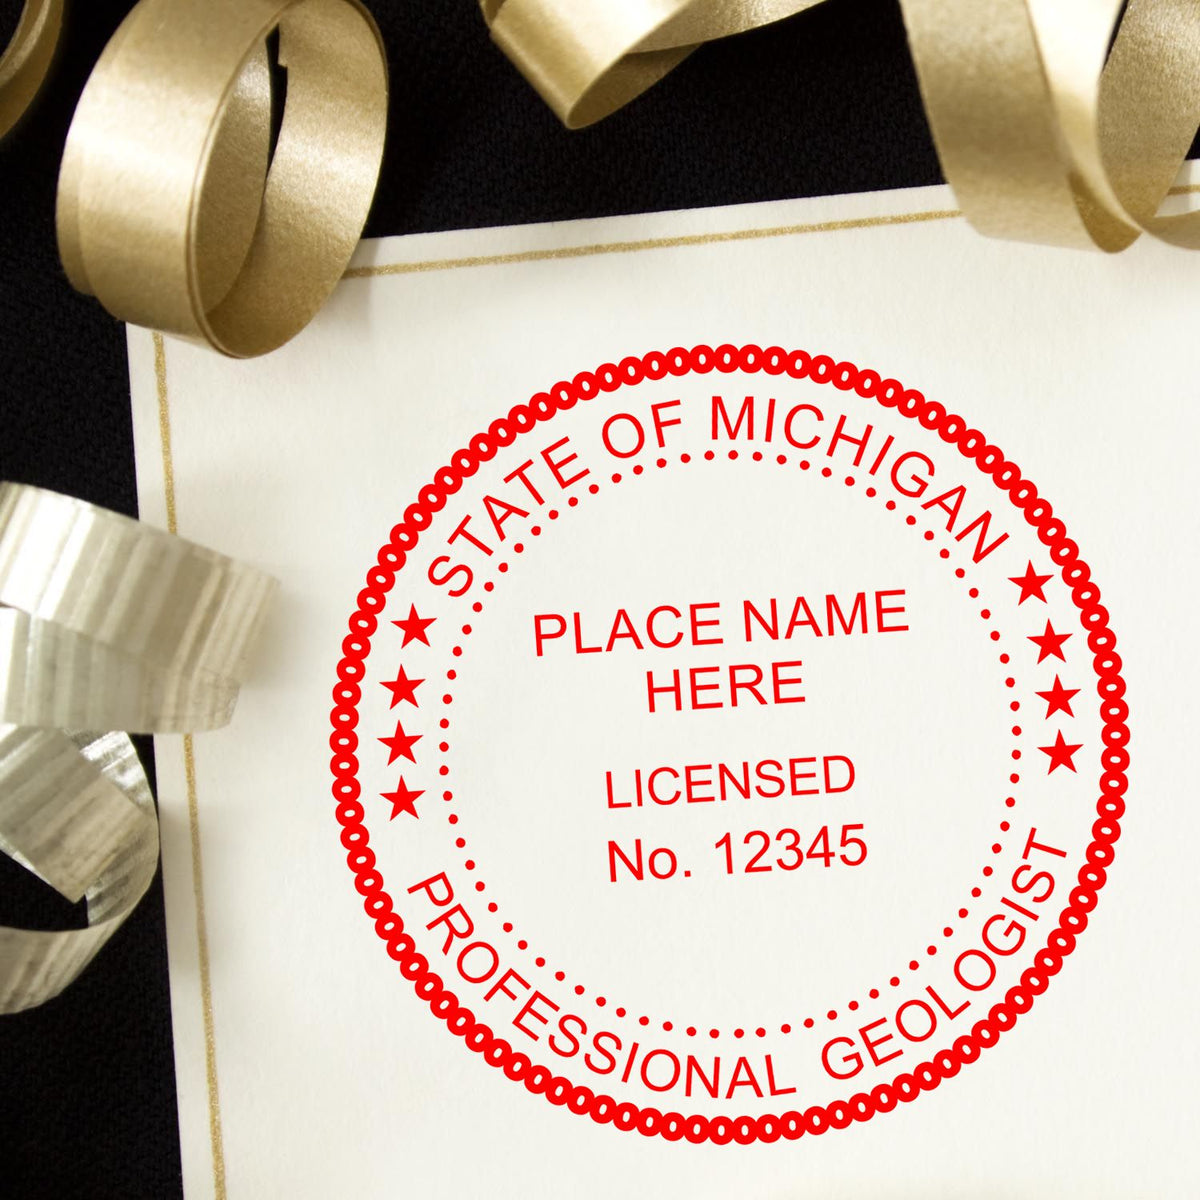 The Digital Michigan Geologist Stamp, Electronic Seal for Michigan Geologist stamp impression comes to life with a crisp, detailed image stamped on paper - showcasing true professional quality.